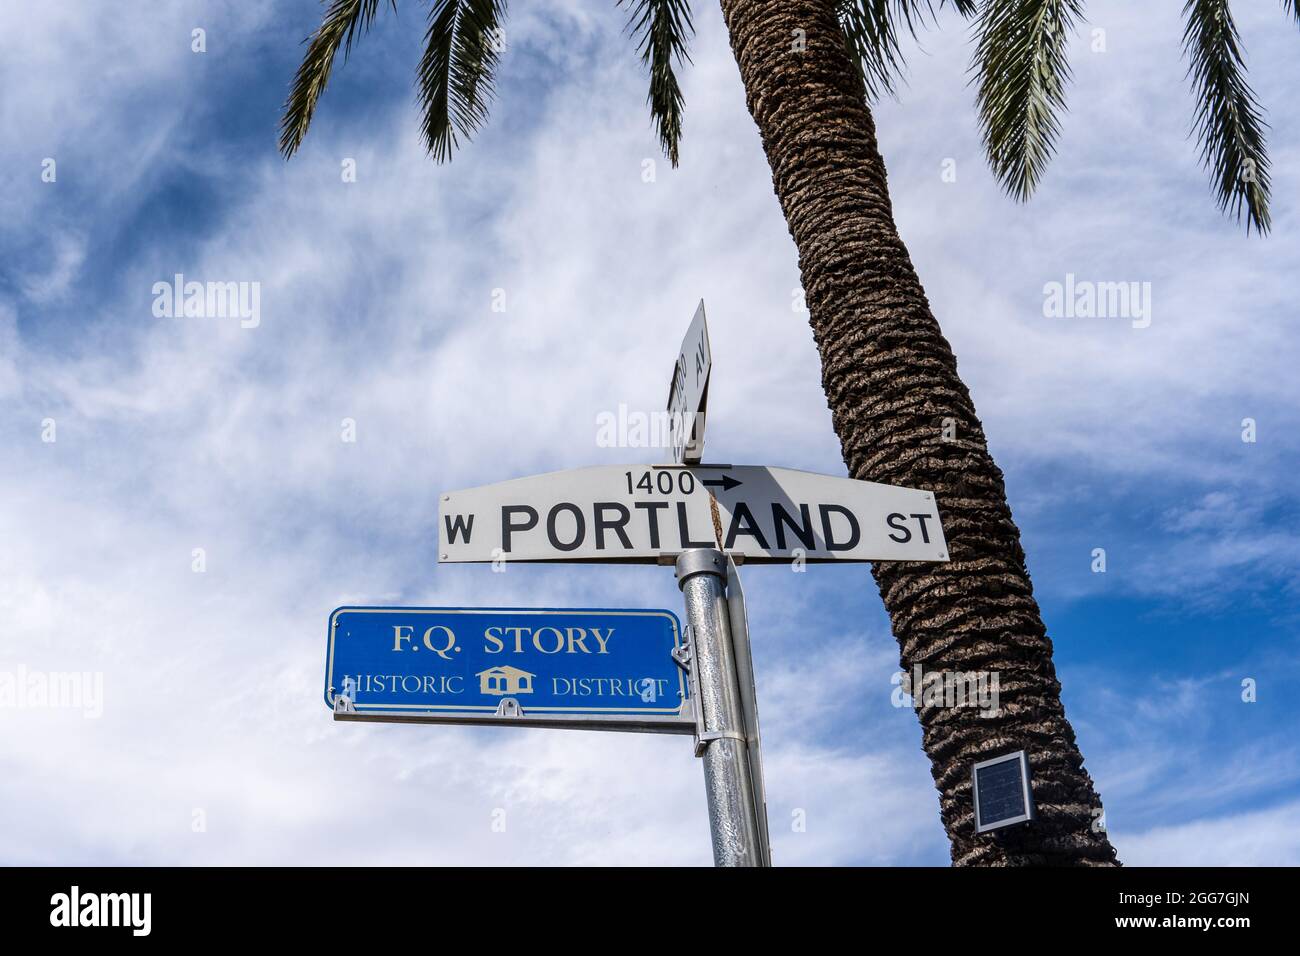 Phoenix, AZ - March 20, 2021: F.Q. Story Historic District is named for Francis Quarles Story, a southern California landowner who expanded into the S Stock Photo